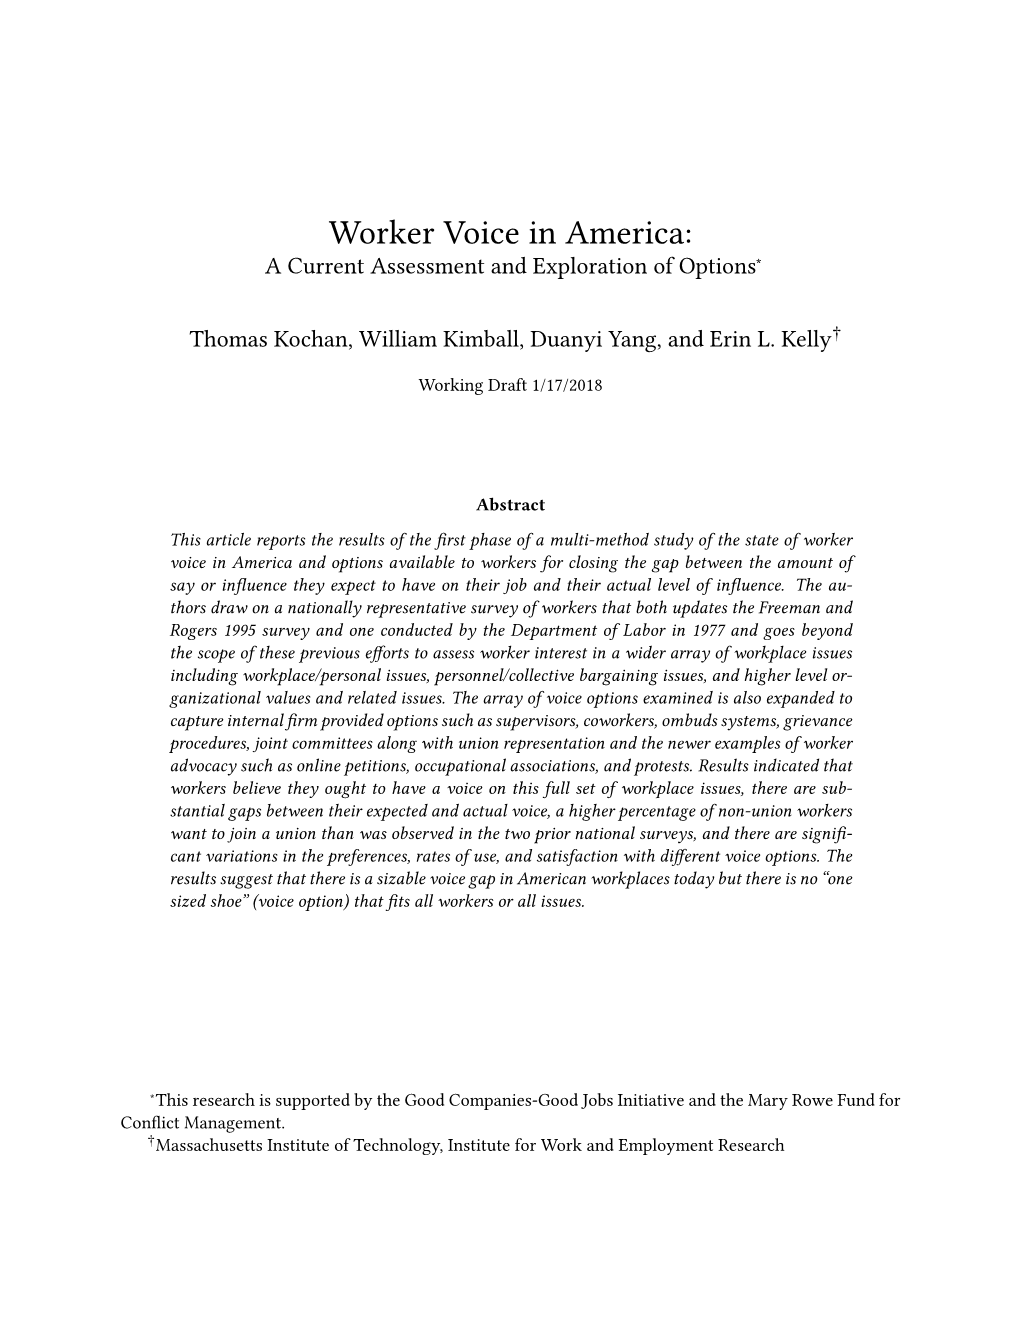 Worker Voice in America: a Current Assessment and Exploration of Options∗